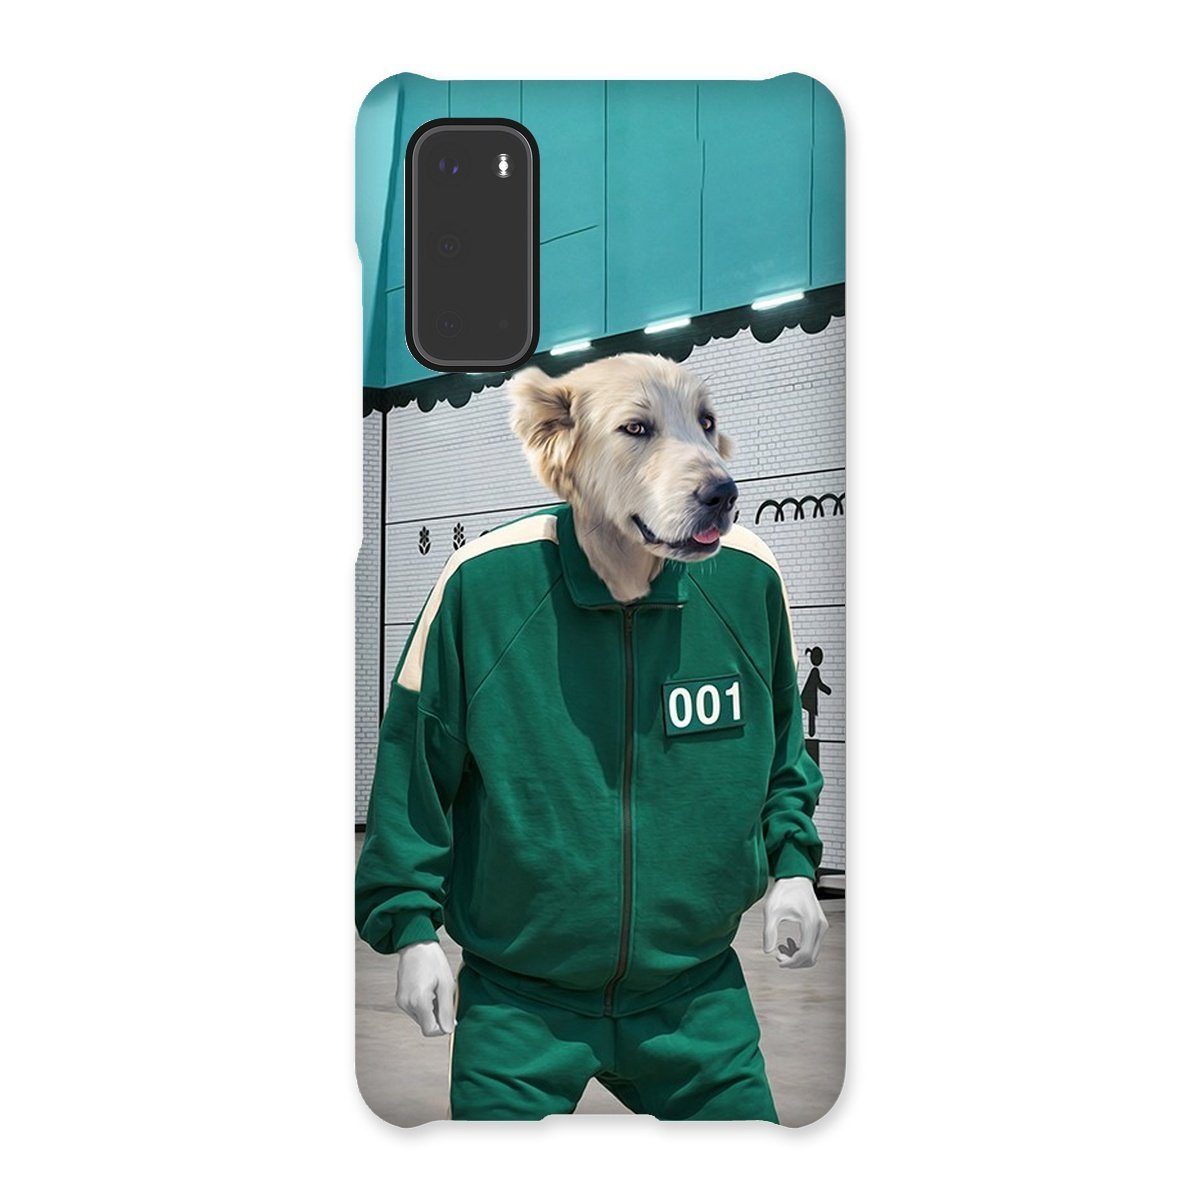 Player 101 (Squid Games Inspired): Custom Phone Case - Paw & Glory - paw and glory, phone case dog, personalised dog phone case uk, pet portrait phone case, pet art phone case, custom dog phone case, pet portrait phone case, Pet Portraits phone case,